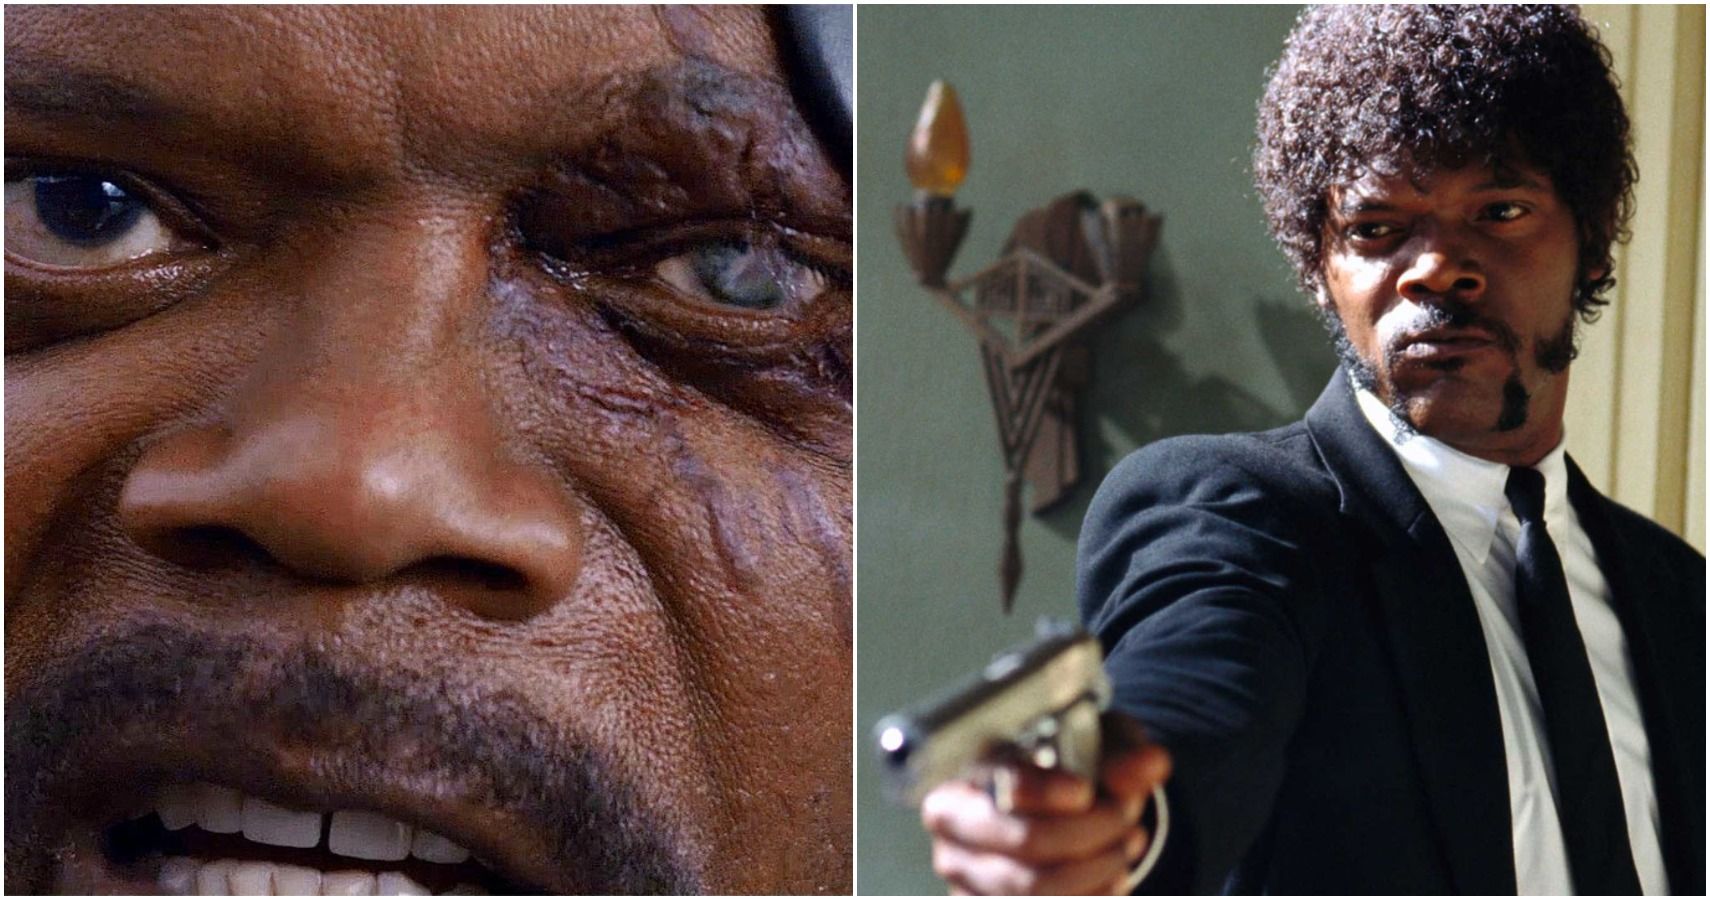 Samuel L Jackson’s 10 Most Badass Characters Ranked by Badassery. 